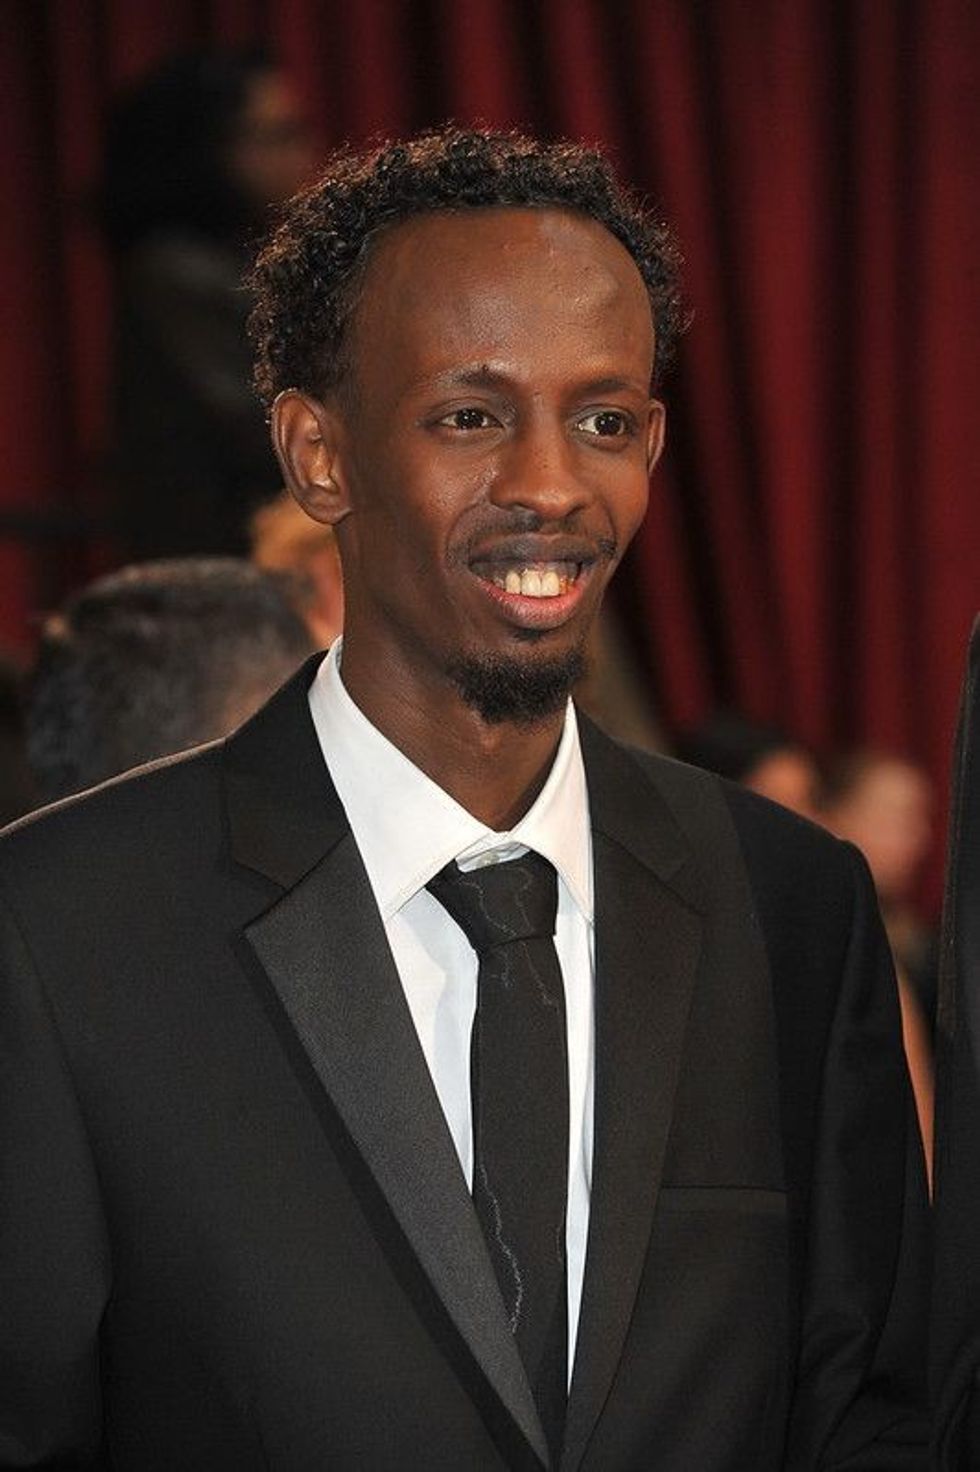 Barkhad Abdi is the son of a school teacher and is fluent in the Somali language.